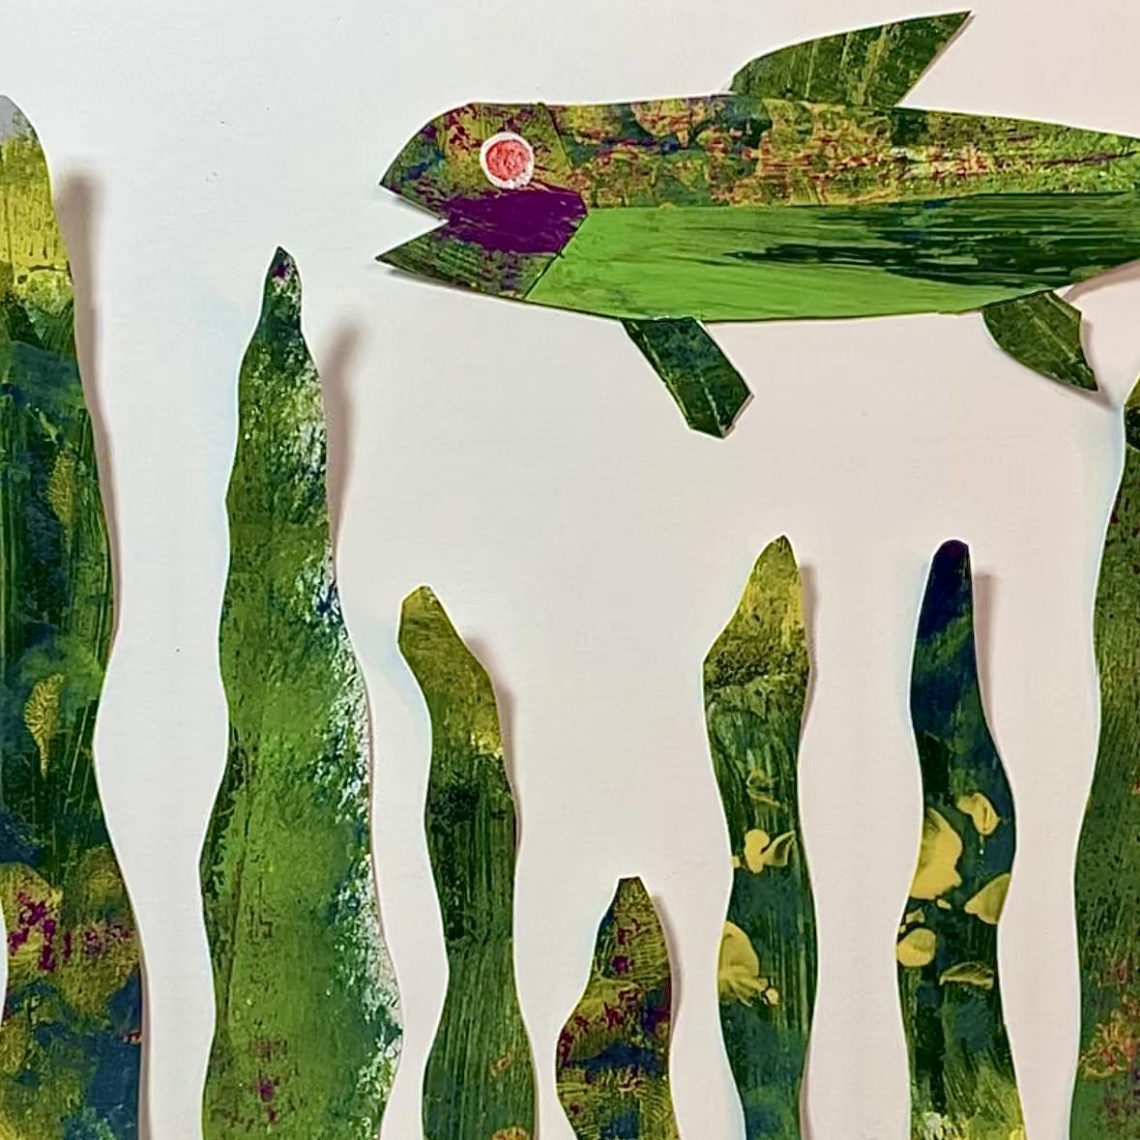 Cut paper fish in shades of green with yellow and magenta. Eric Carle style.